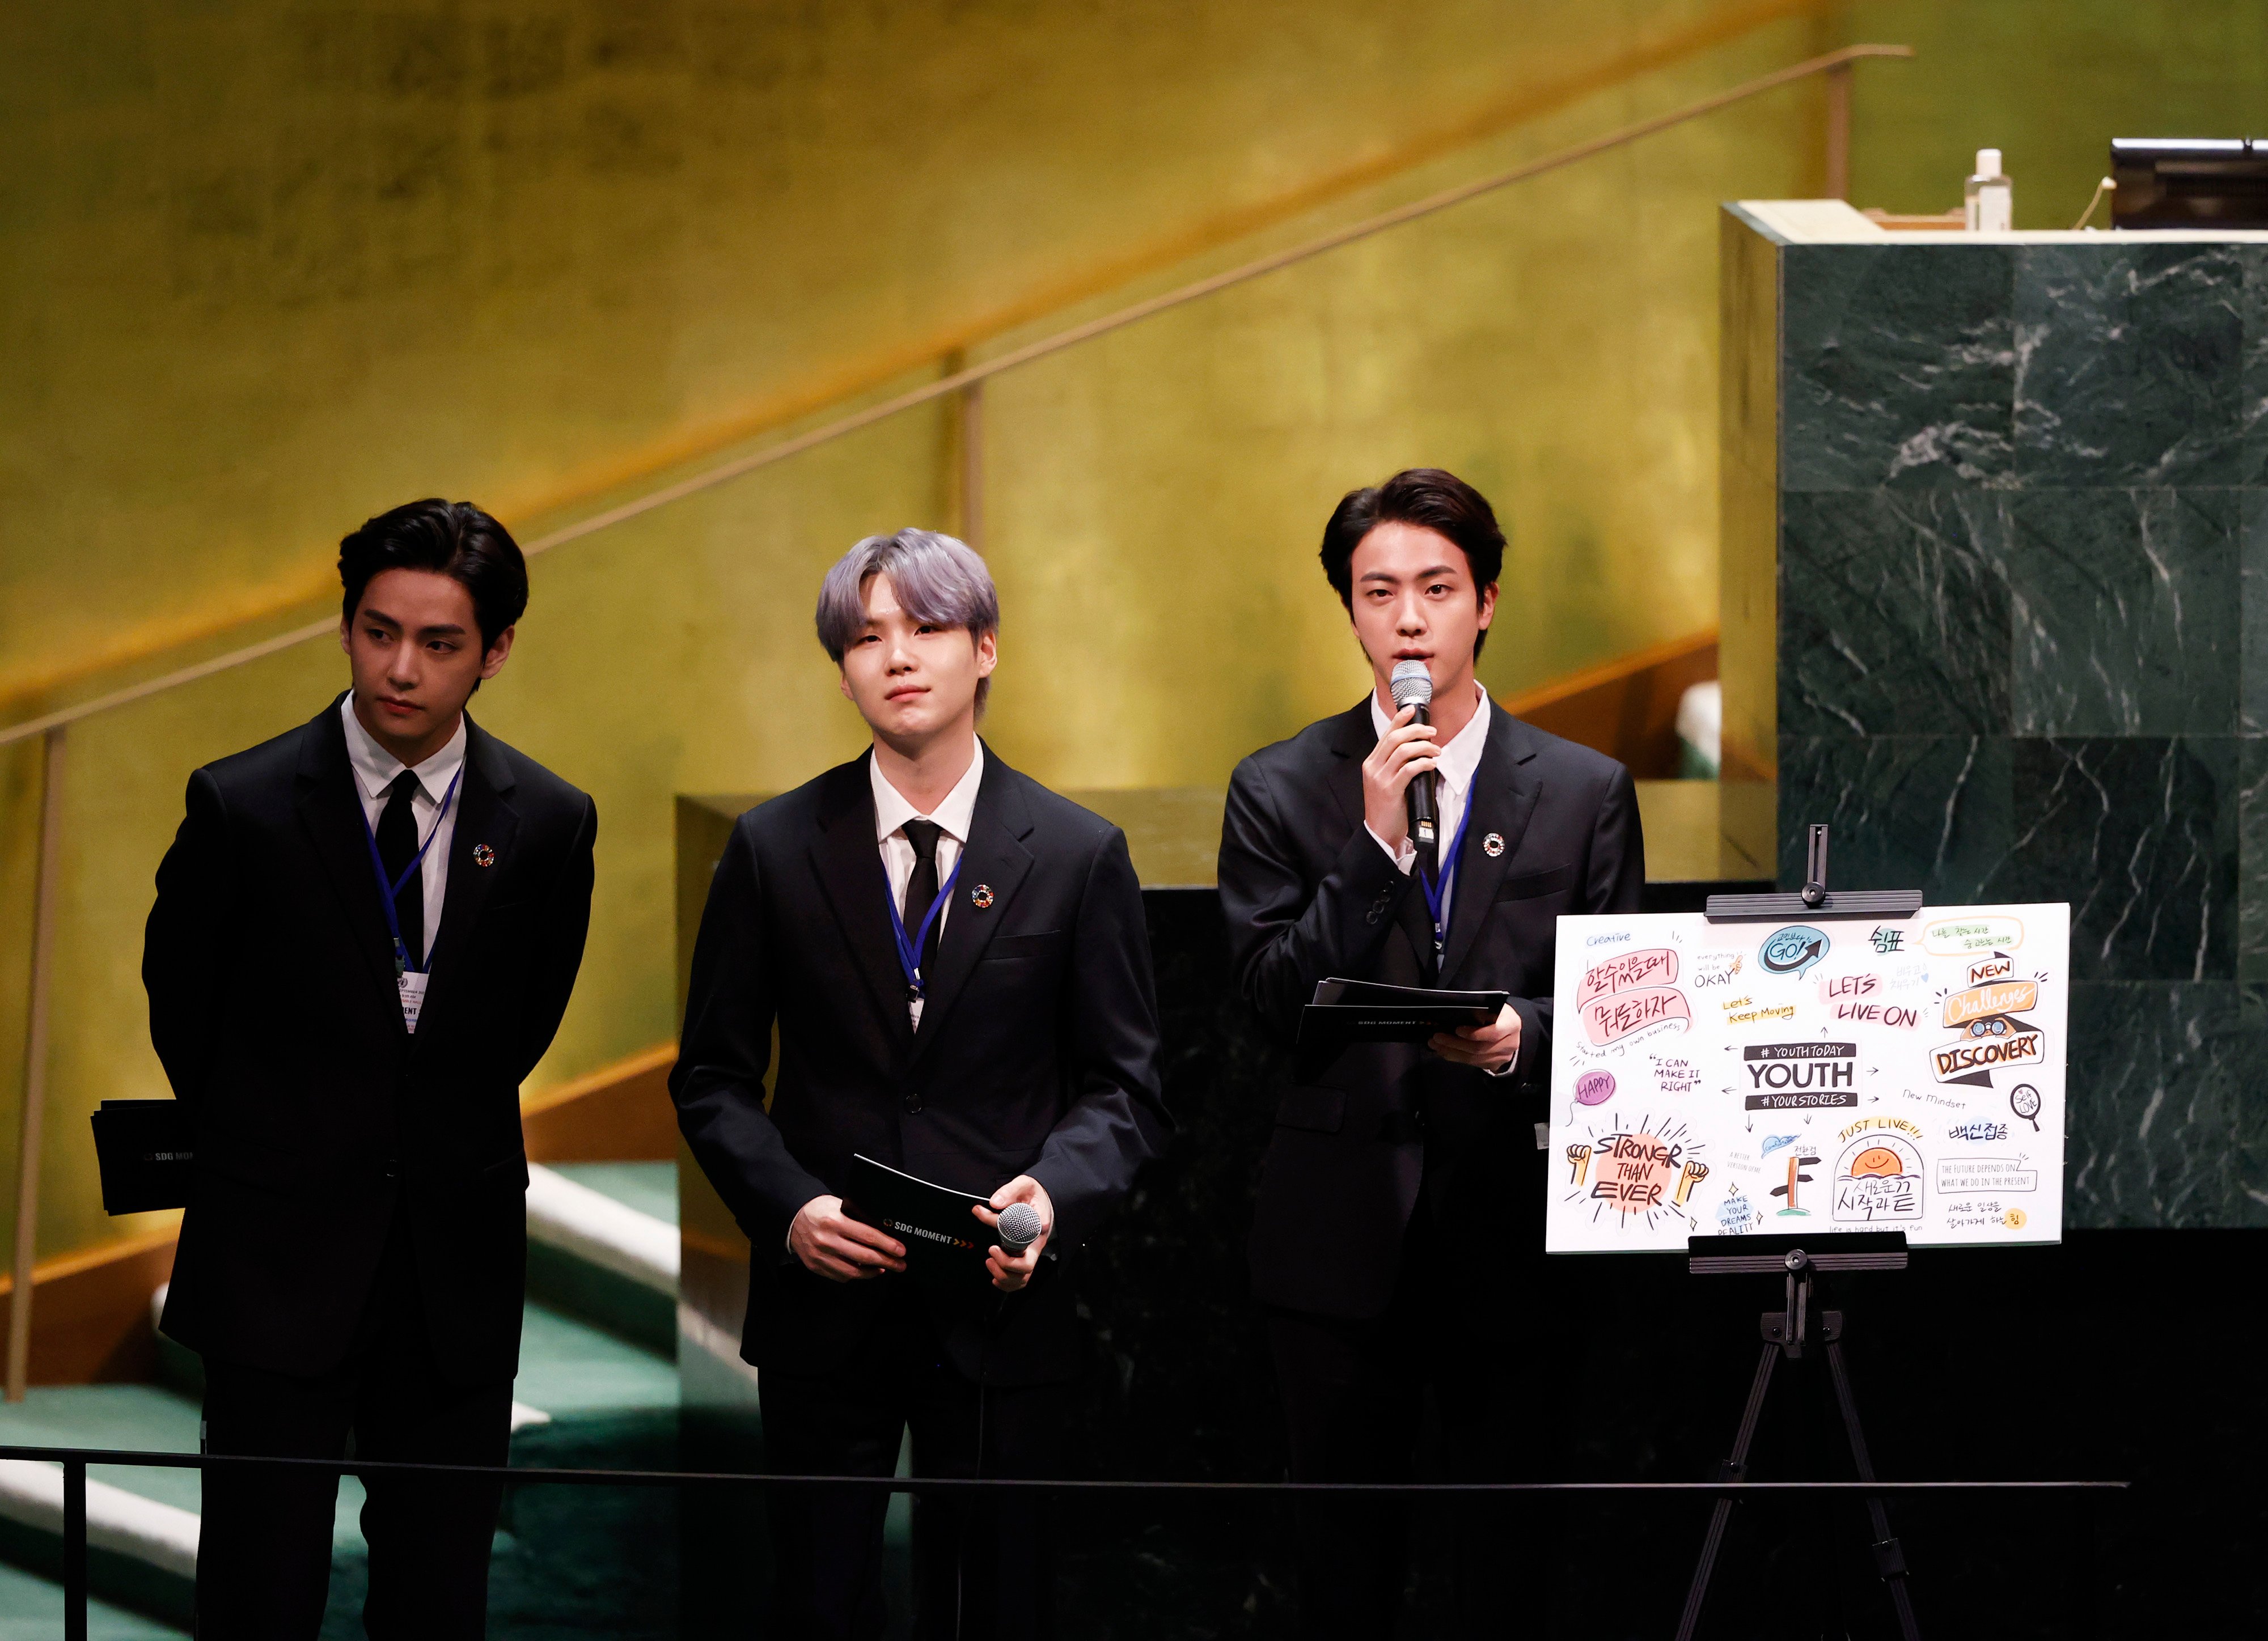 Taehyung/V, Suga and Jin of boy band BTS speaking at the SDG Moment event as part of the UN General Assembly